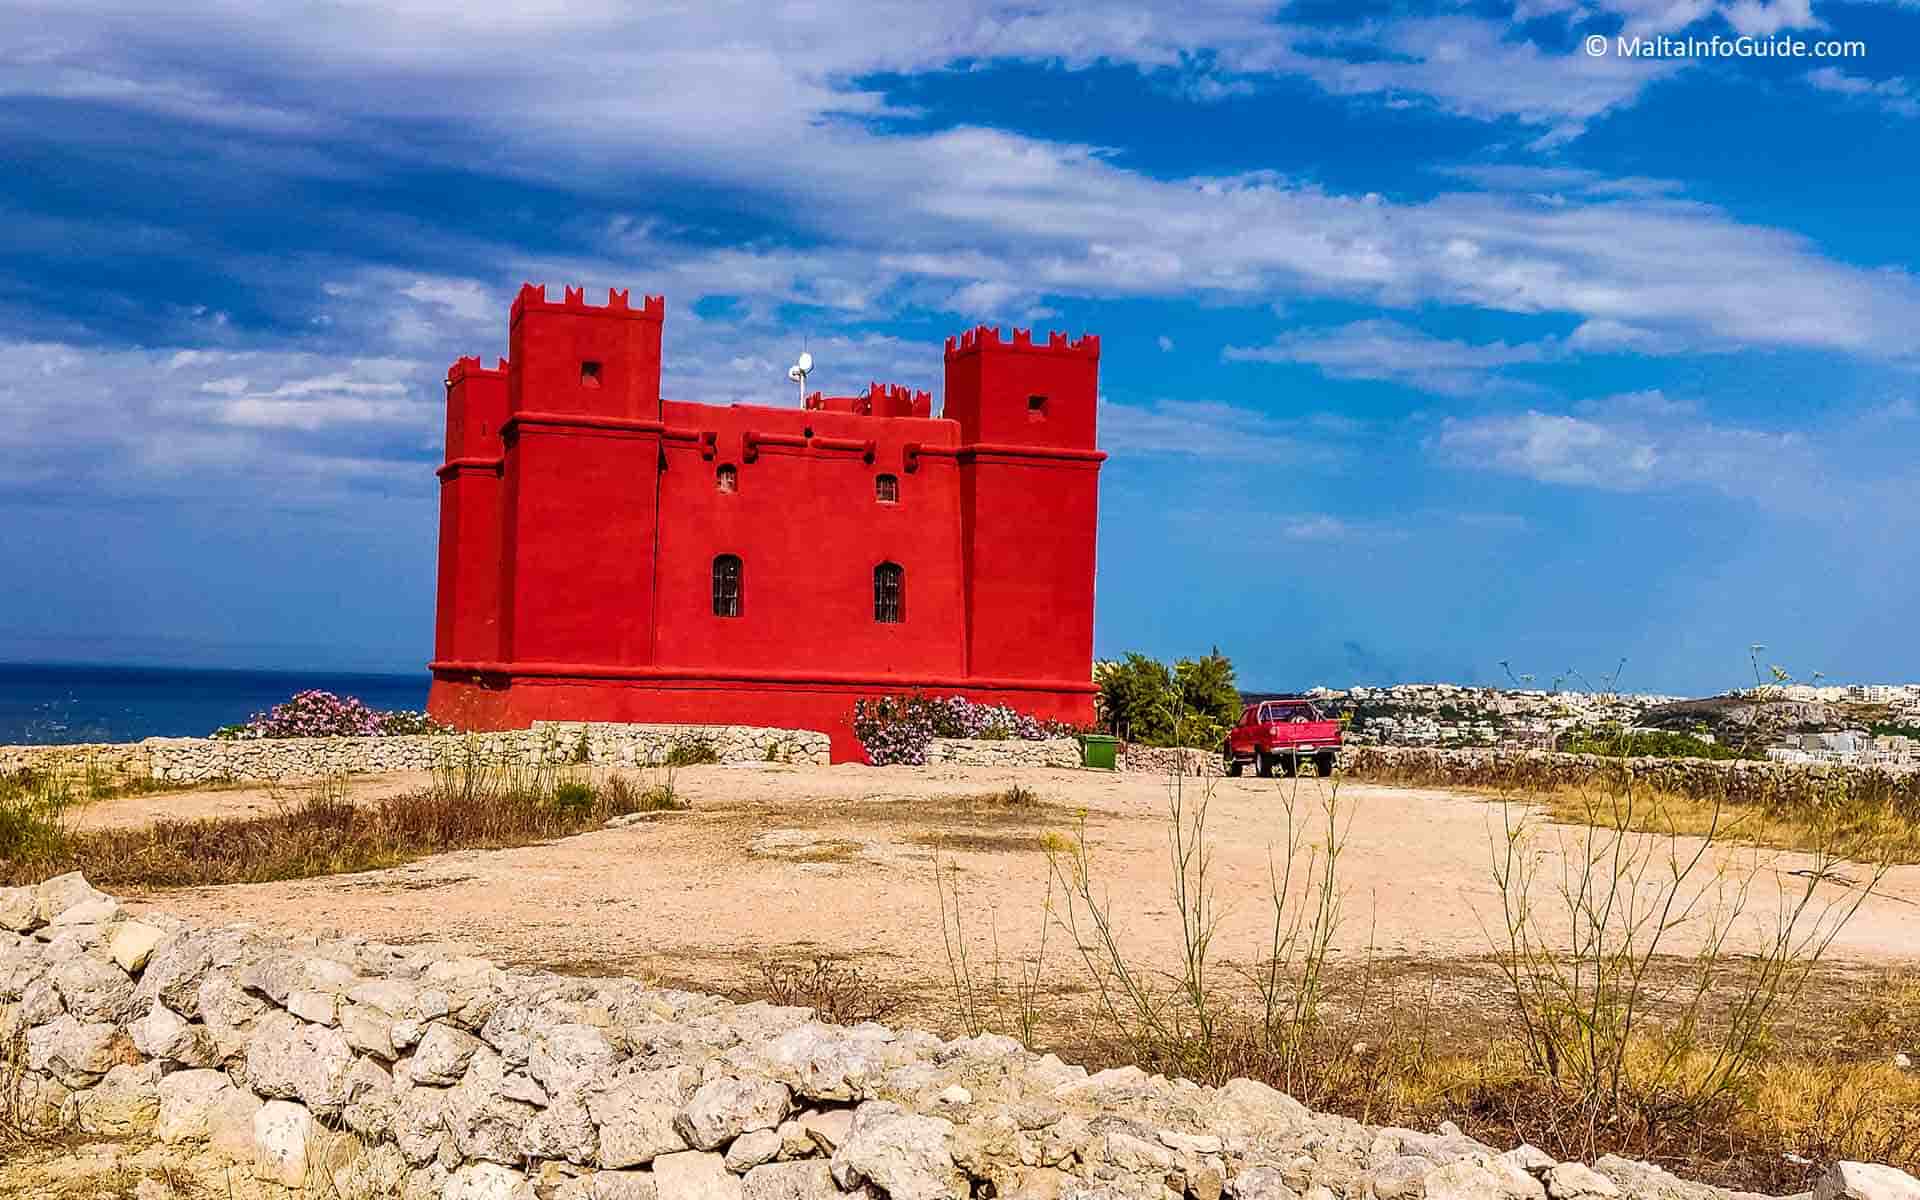 The Red tower in Mellieha.